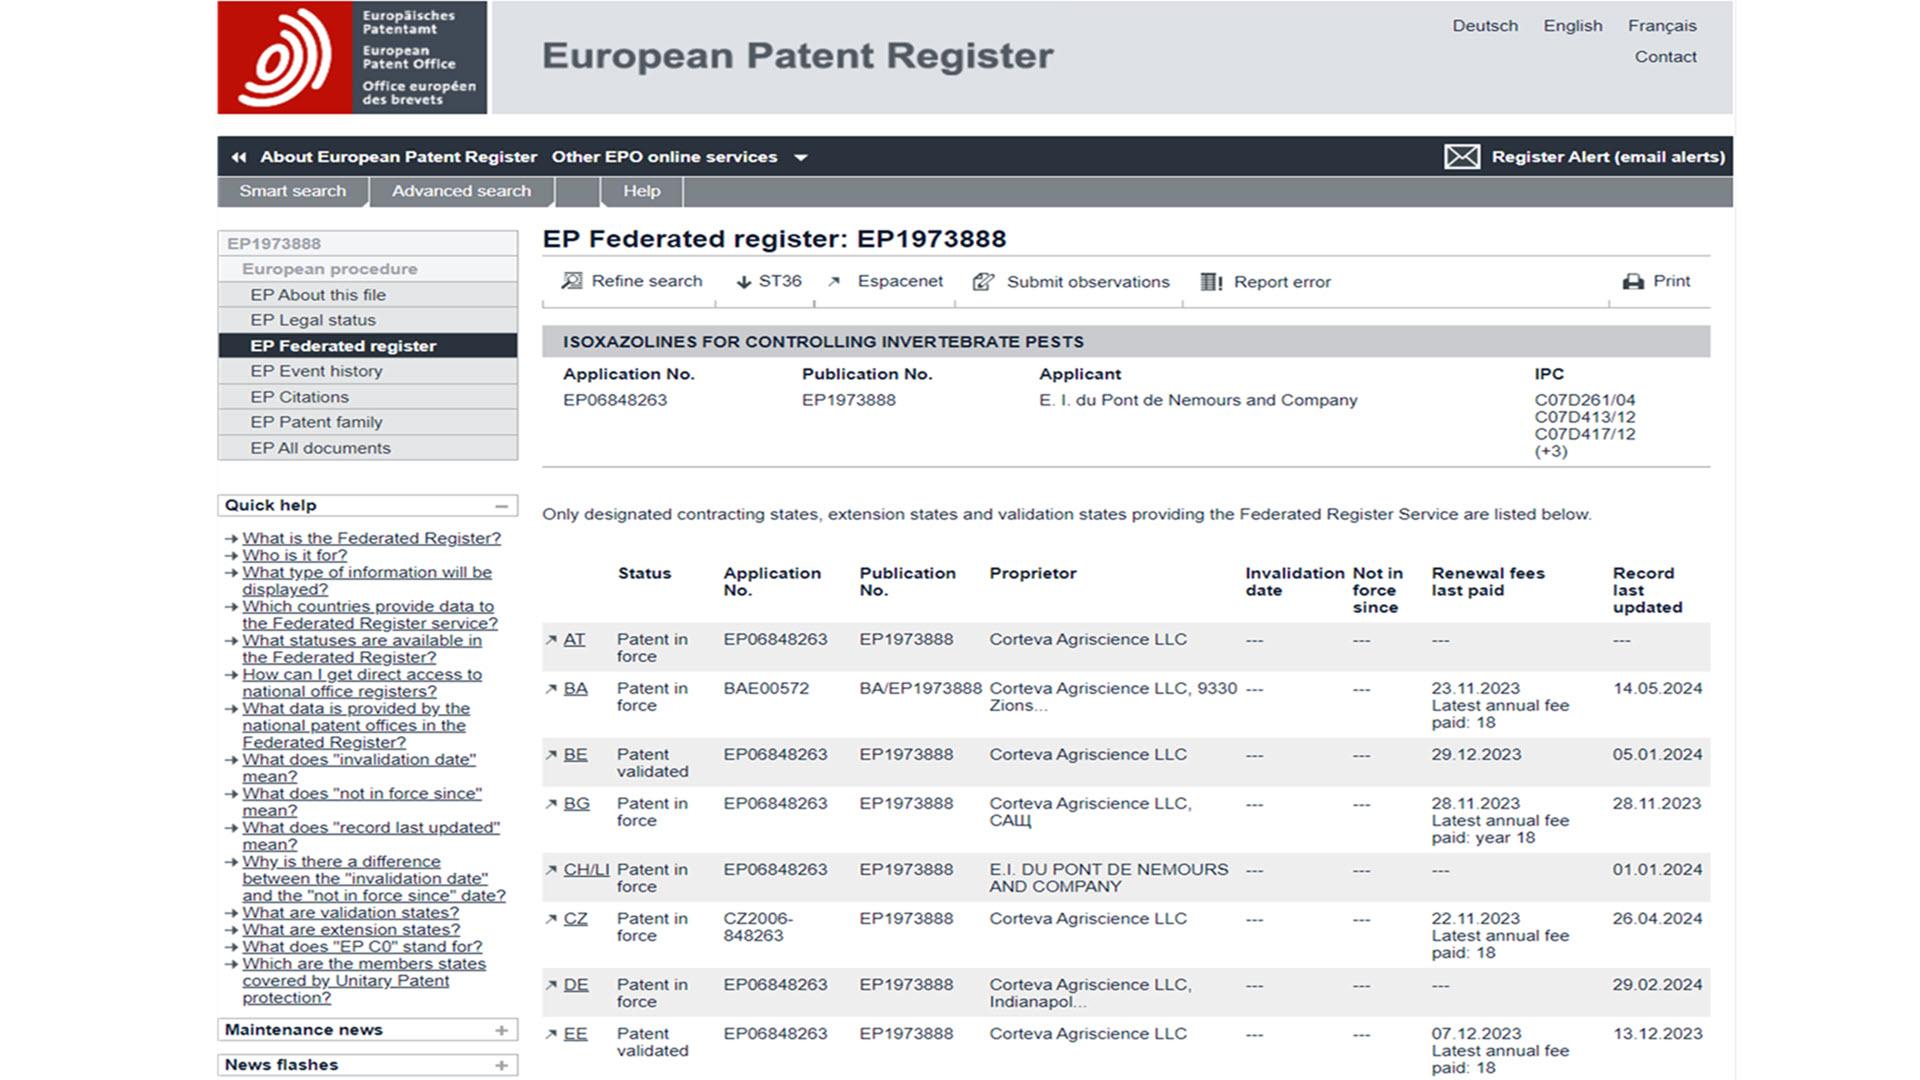 Screenshot from EP Federated Register